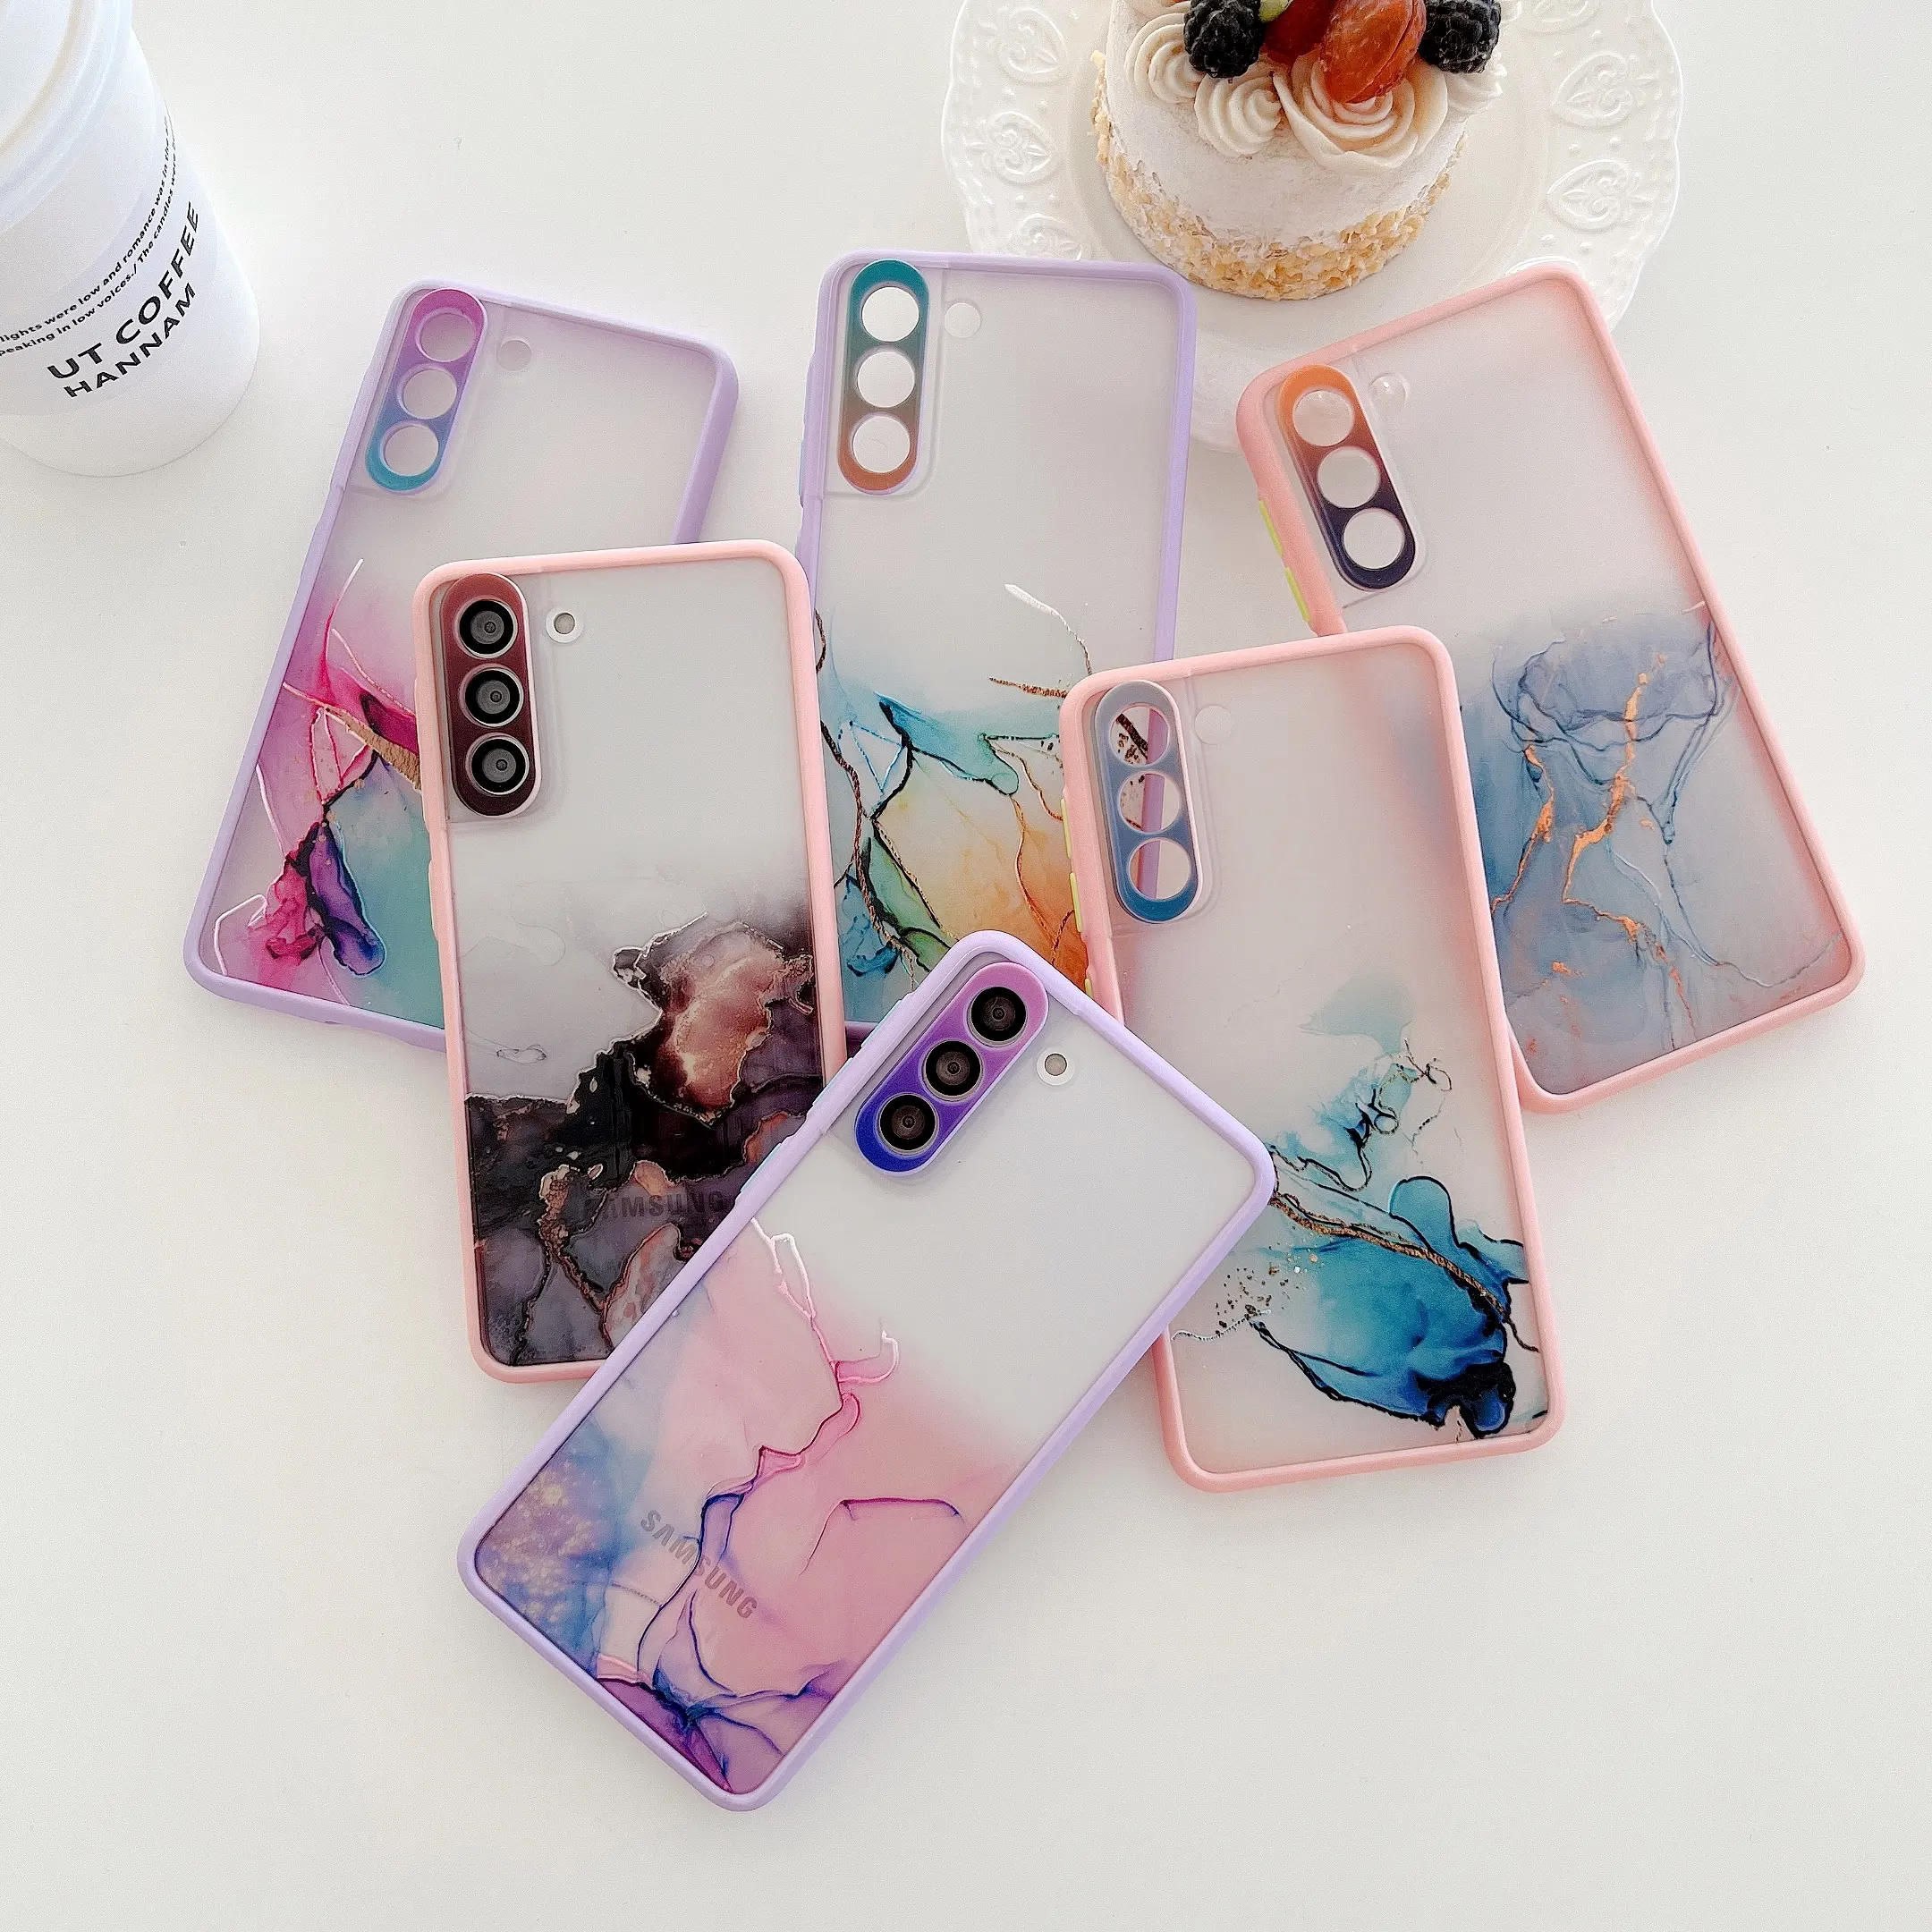 Marble Flower Case For Samsung Galaxy A40 A50 A70 A51 A71 A12 A52 A72 Back Cover Soft Silicone Phone Cases Coque Shell